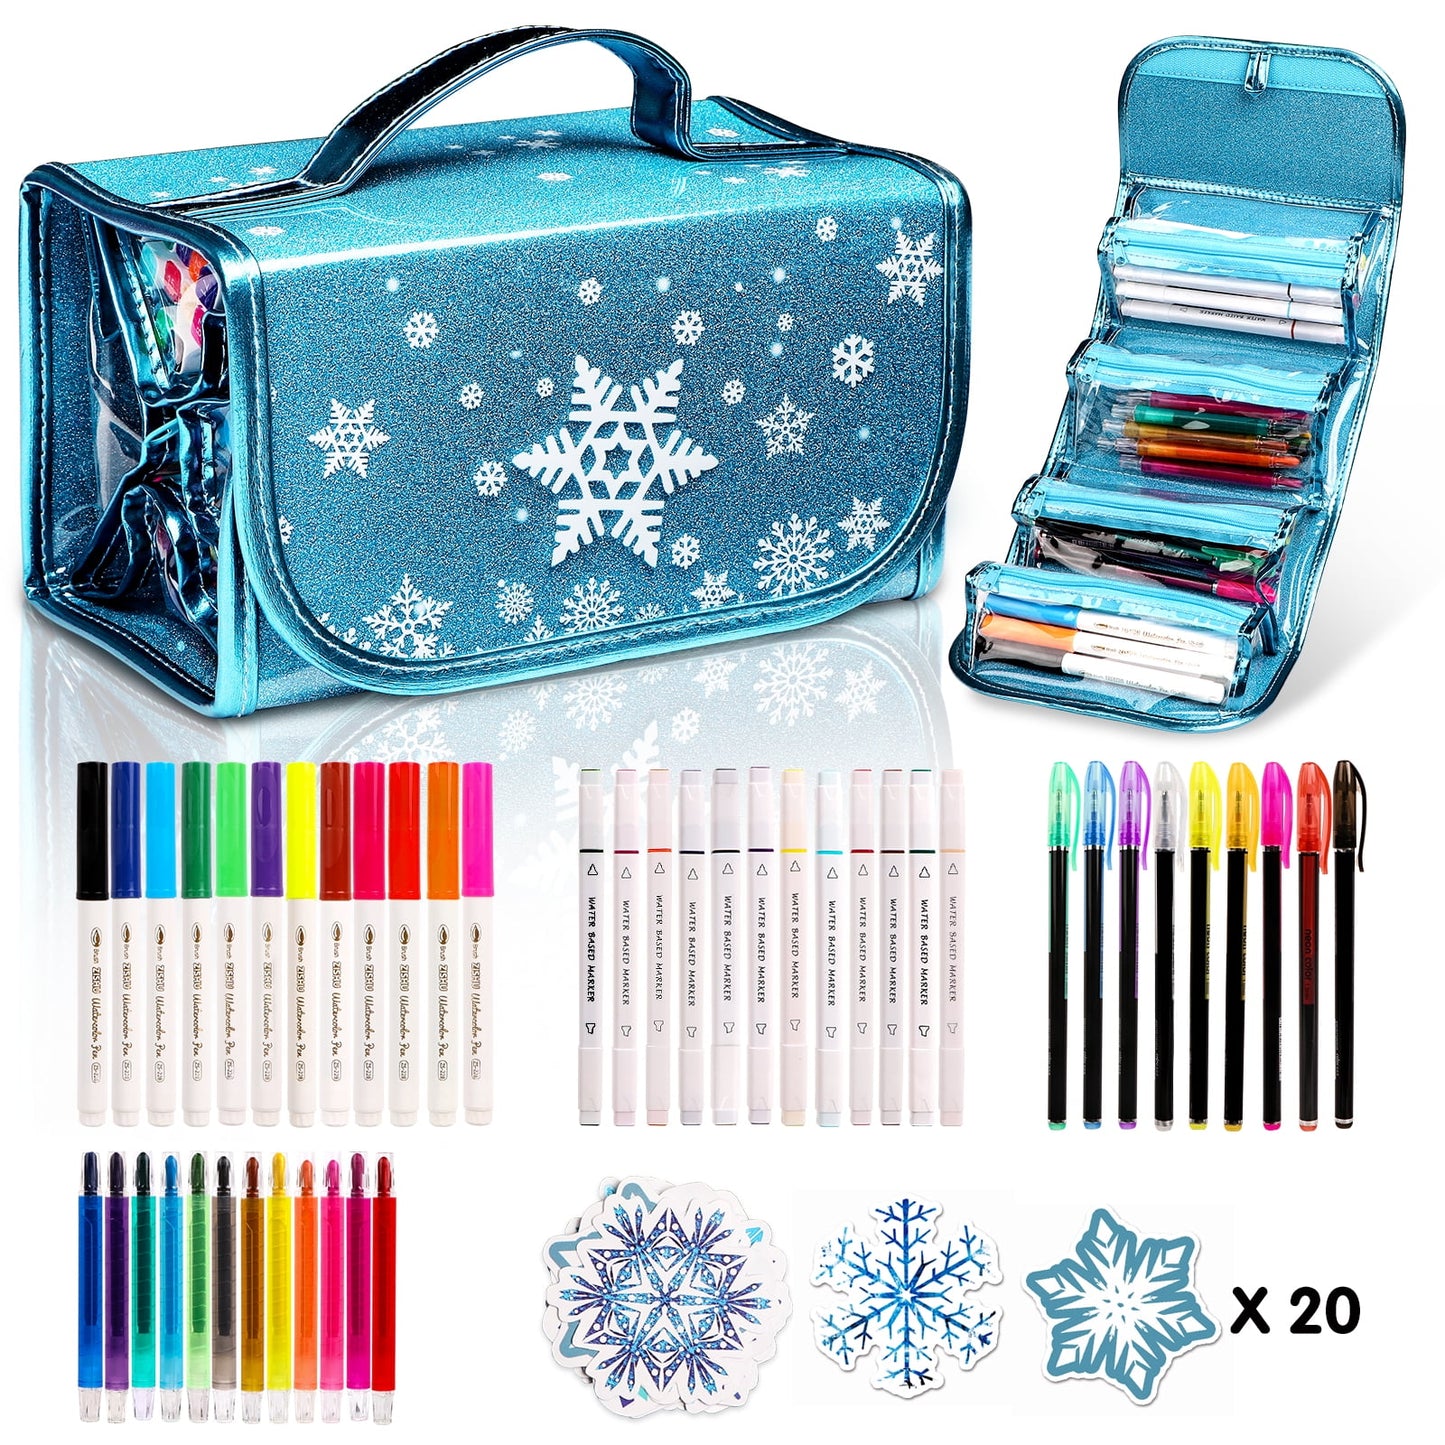 Fruit Scented Markers Set, 56 Pcs with Frozen Snowflake Pencil Case, Frozen Gifts for Girls Ages 4-6-8, Art Supplies for Kids, School Supply Kit Christmas Birthday Gift for Girls 3+